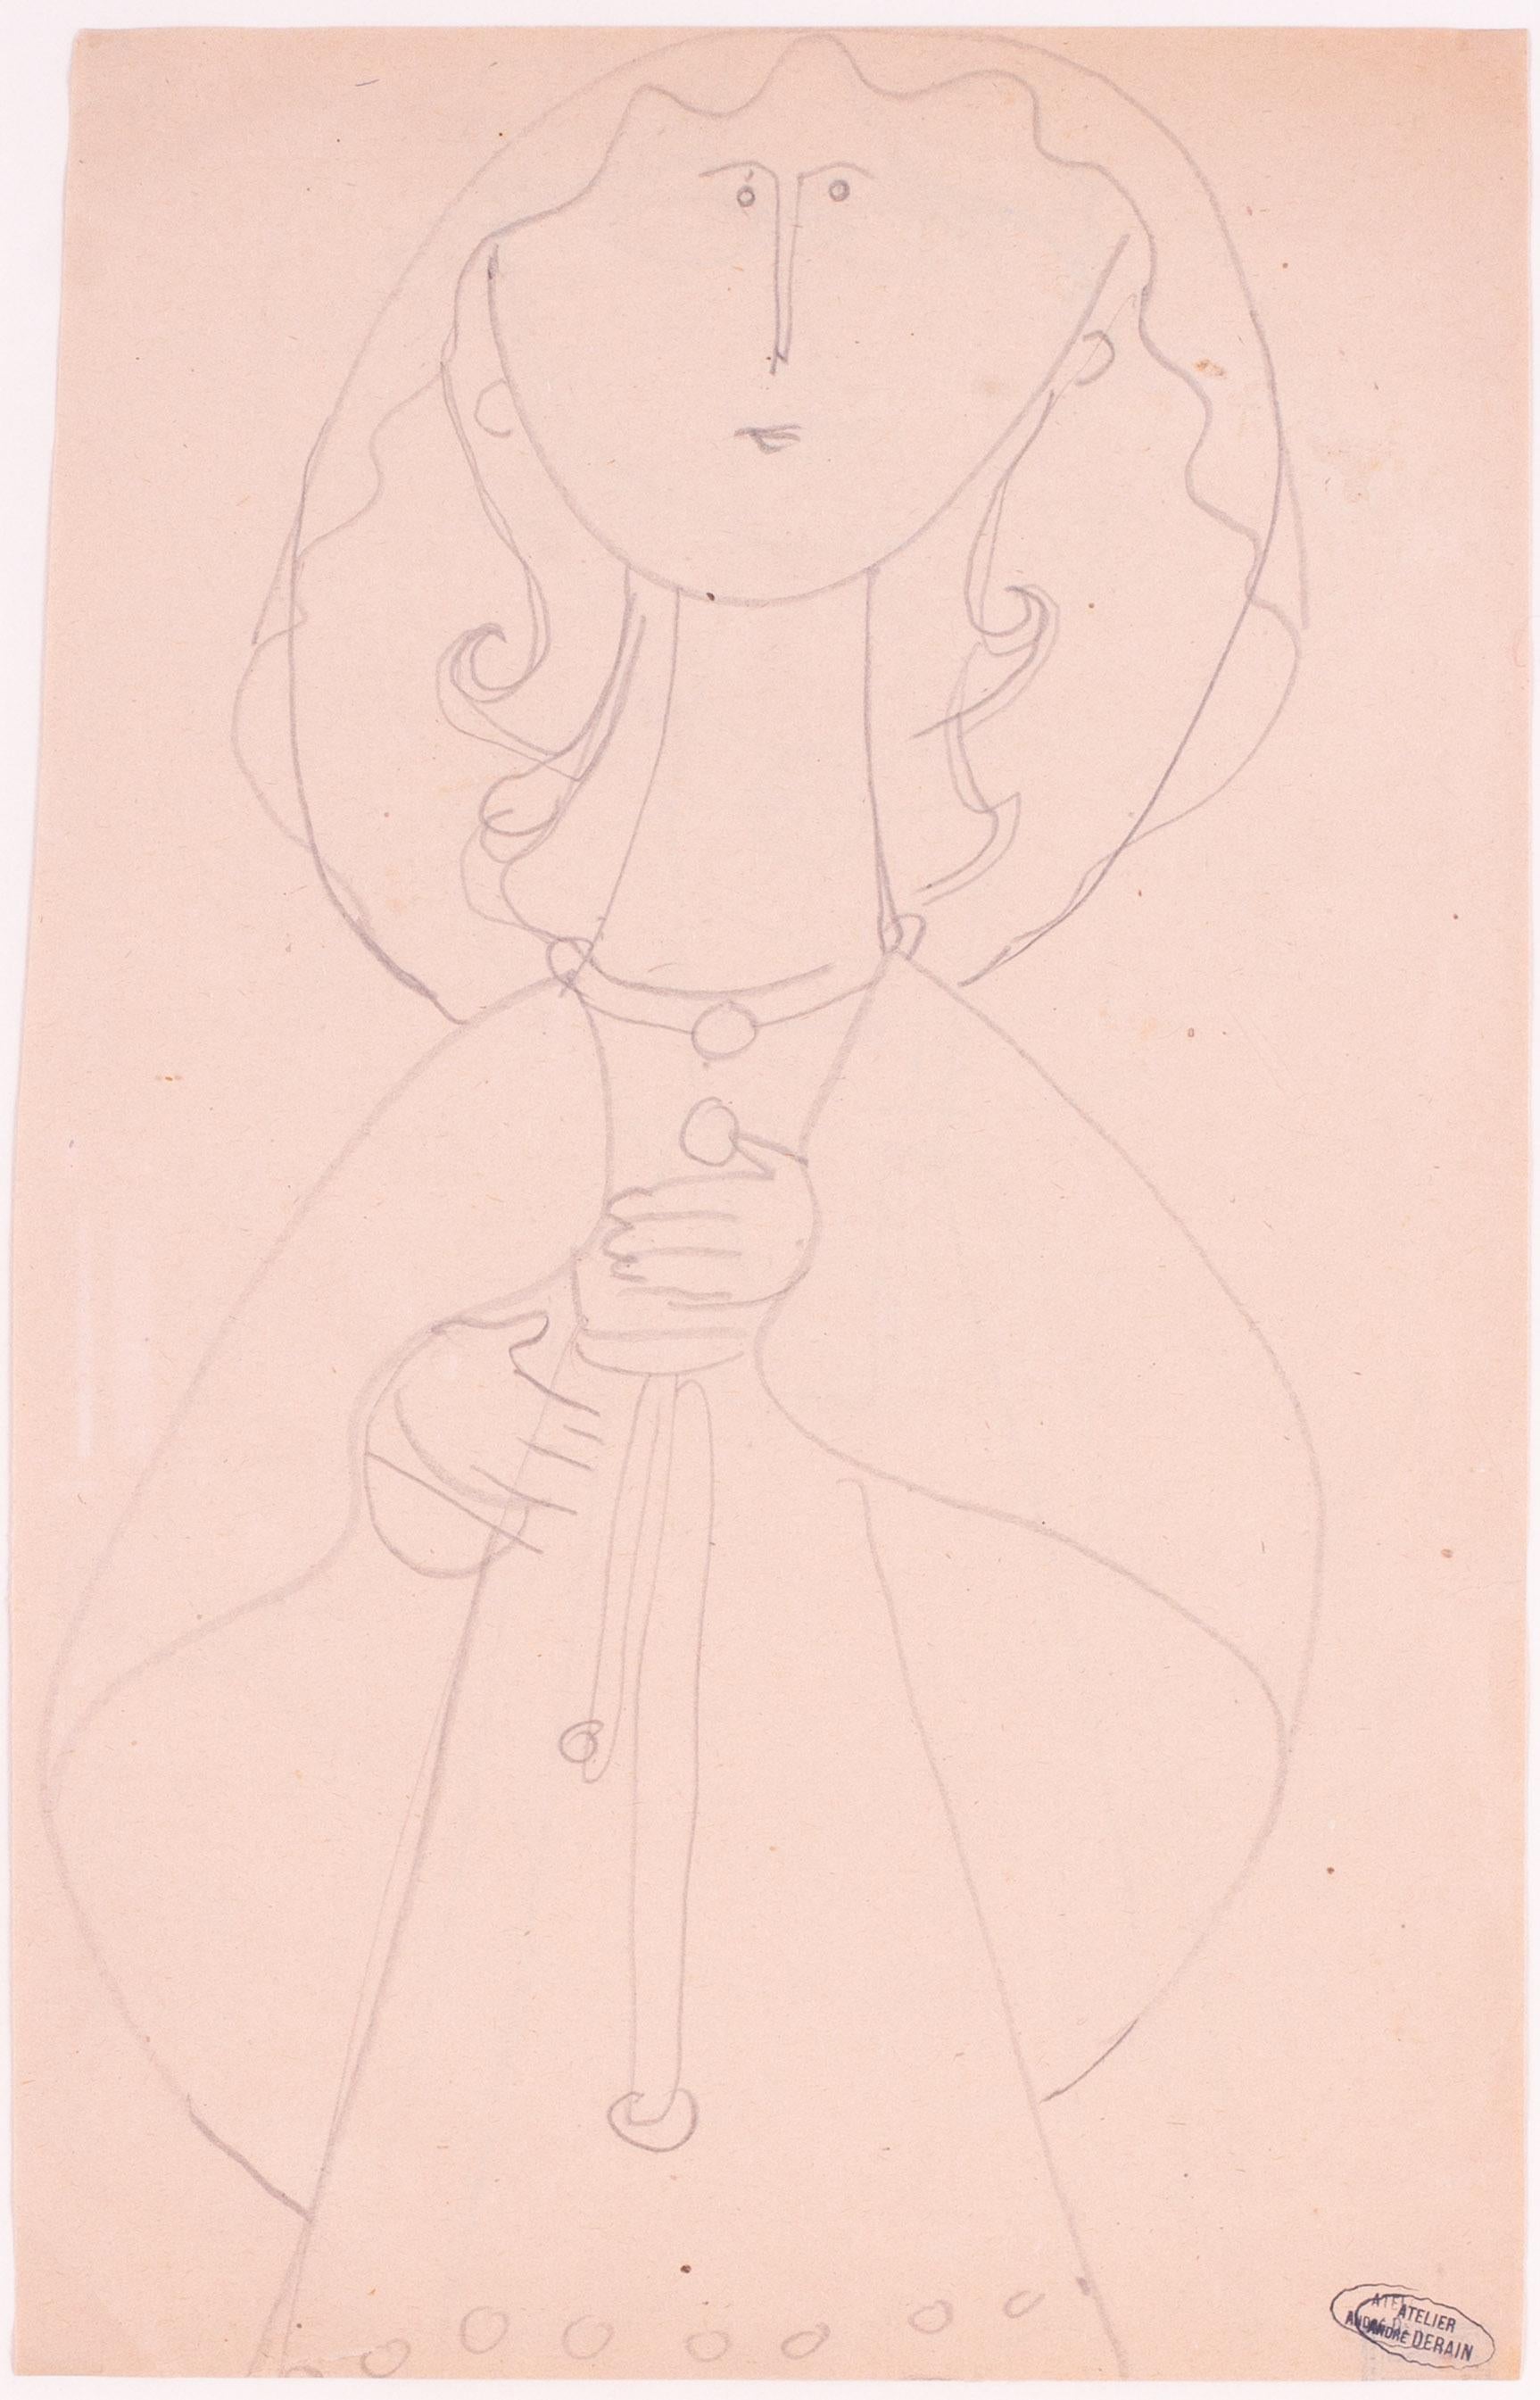 Early 20th Century French Fauvist drawing by Andre Derain of a lady in a dress - Art by André Derain